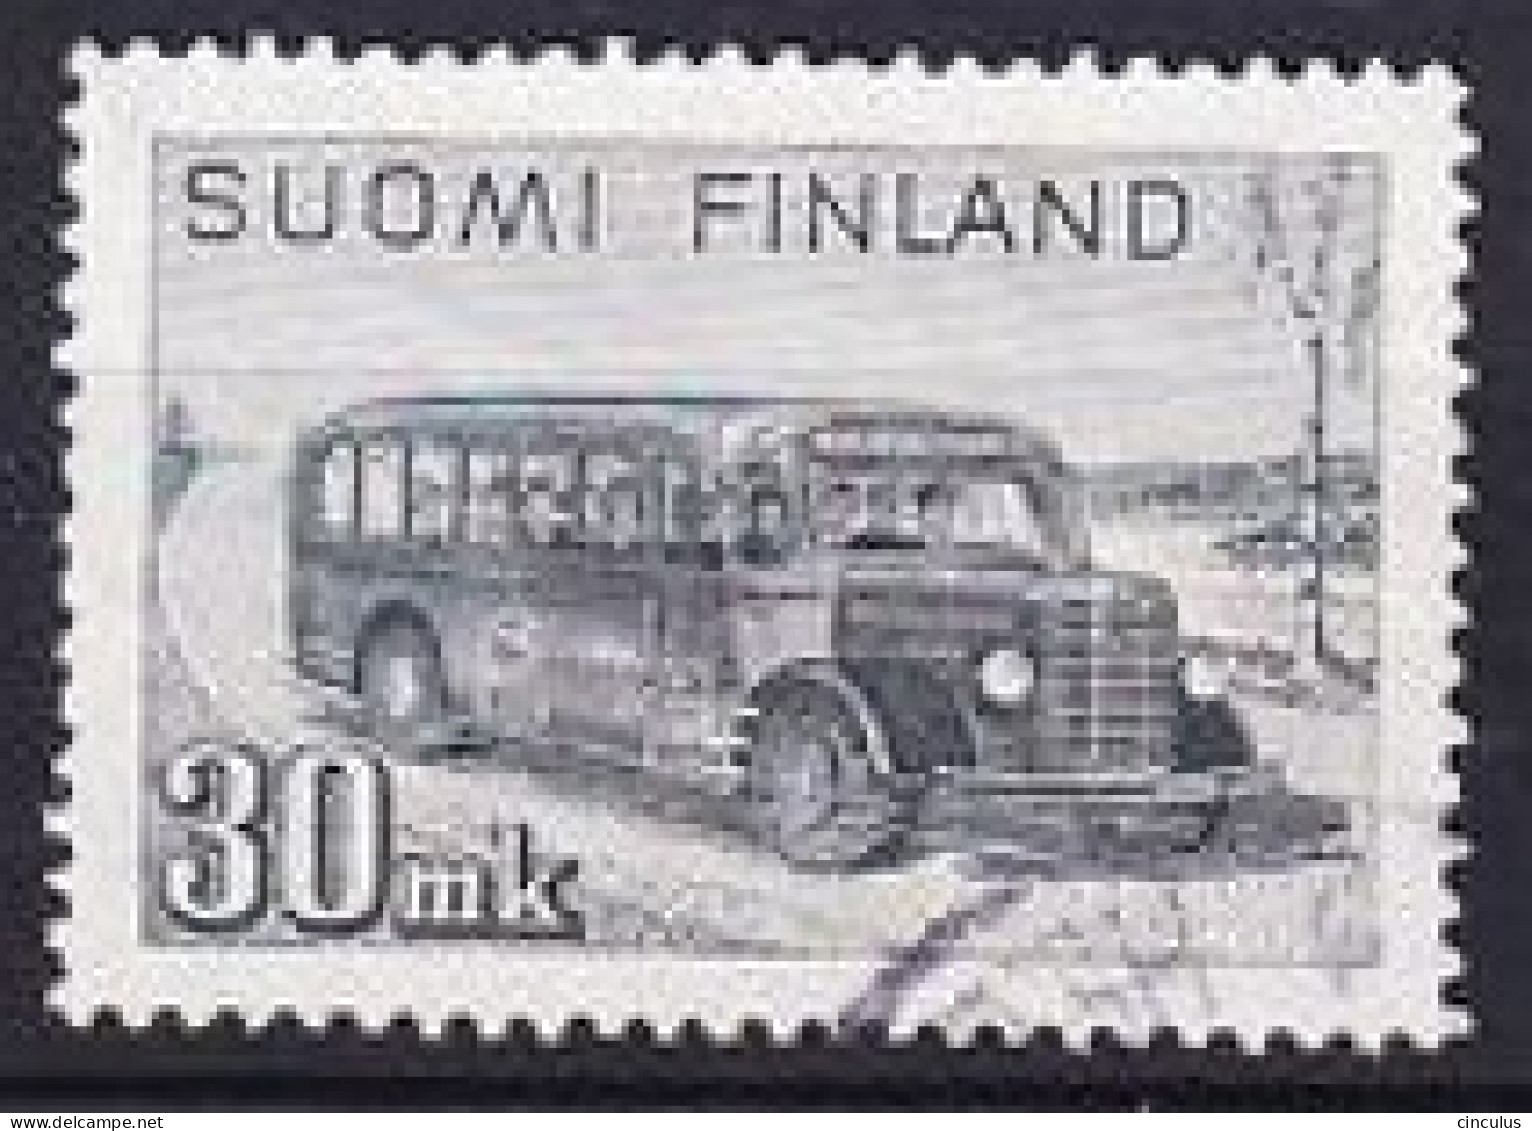 1946. Finland. Post And Travel Coach. 30 M. Used. Mi. Nr. 330 - Used Stamps